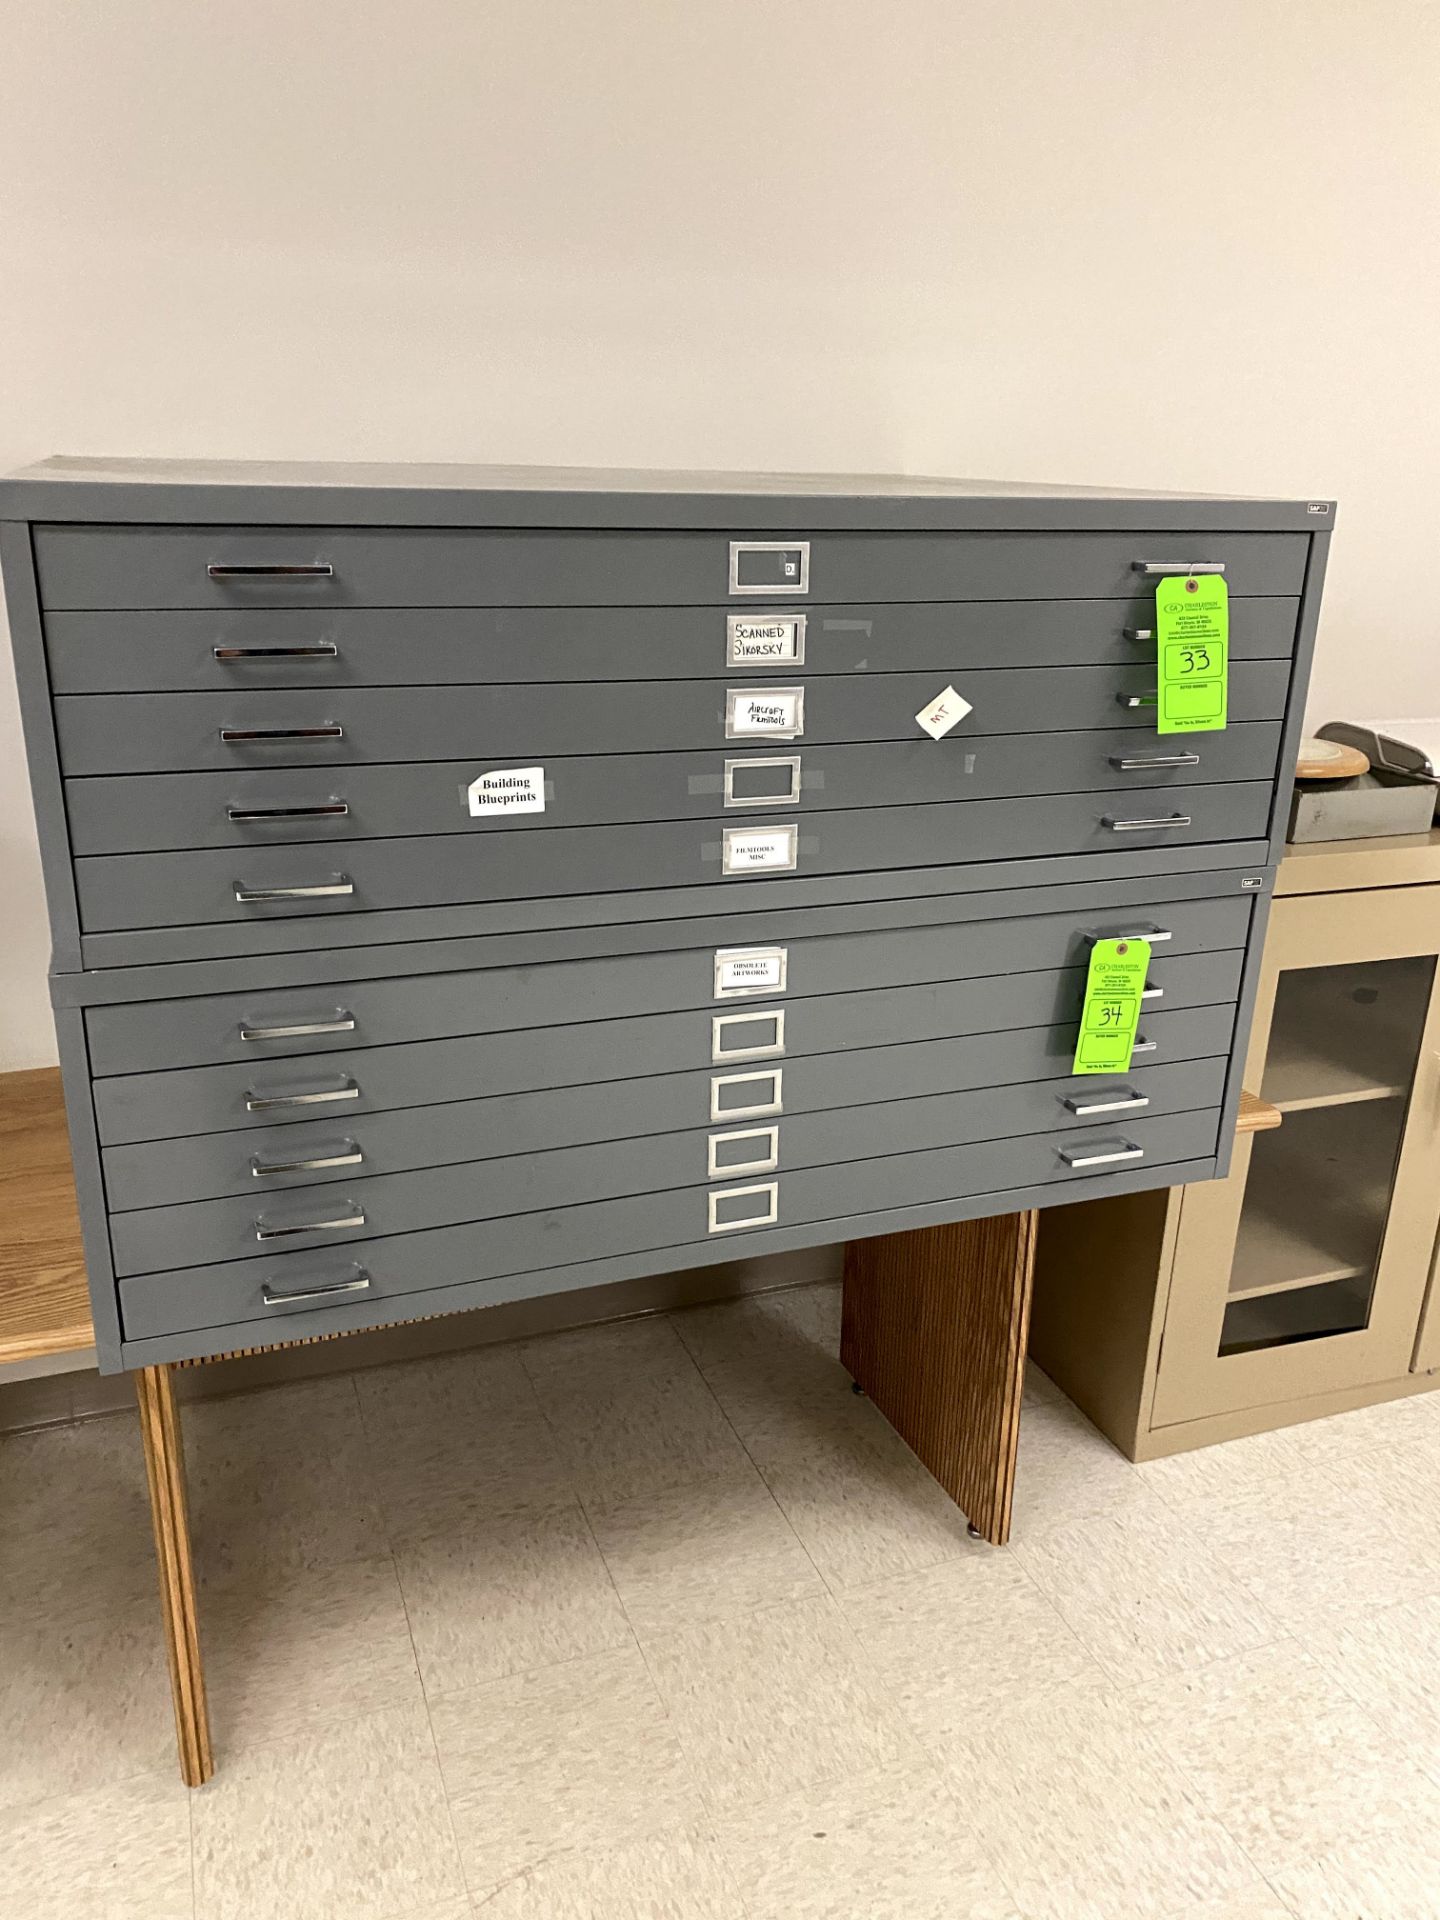 SAFCO 5-DRAWER BLUE PRINT/TRACING CABINET -- (7625 OMNITECH PLACE VICTOR NEW YORK)